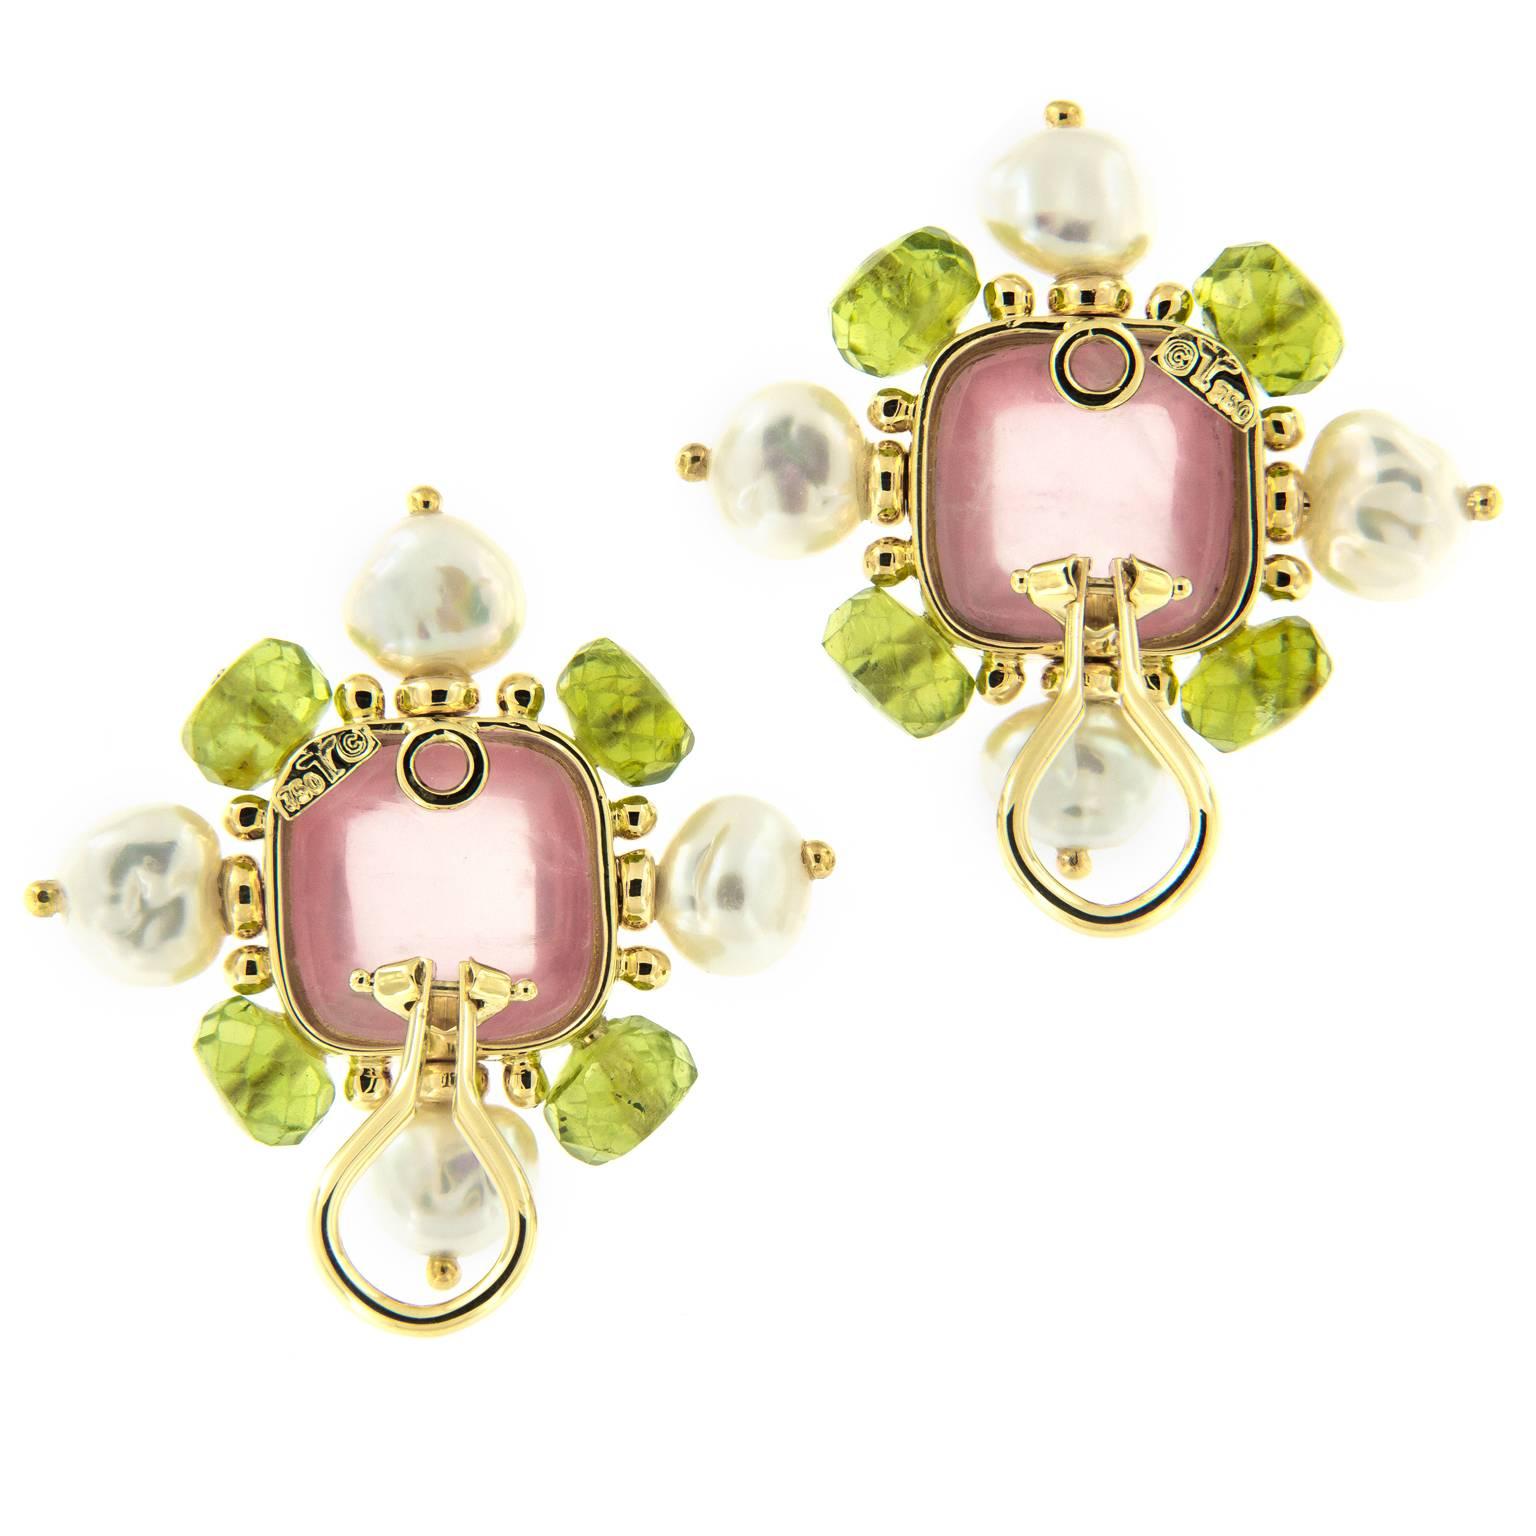 Creating original jewels with unusual combinations of precious and exotic materials has been the hallmark of Trianon jewelry. These beautiful earrings are comprised of a rose quartz center cabachon with 8-6 mm faceted peridots and pearls set in 18k